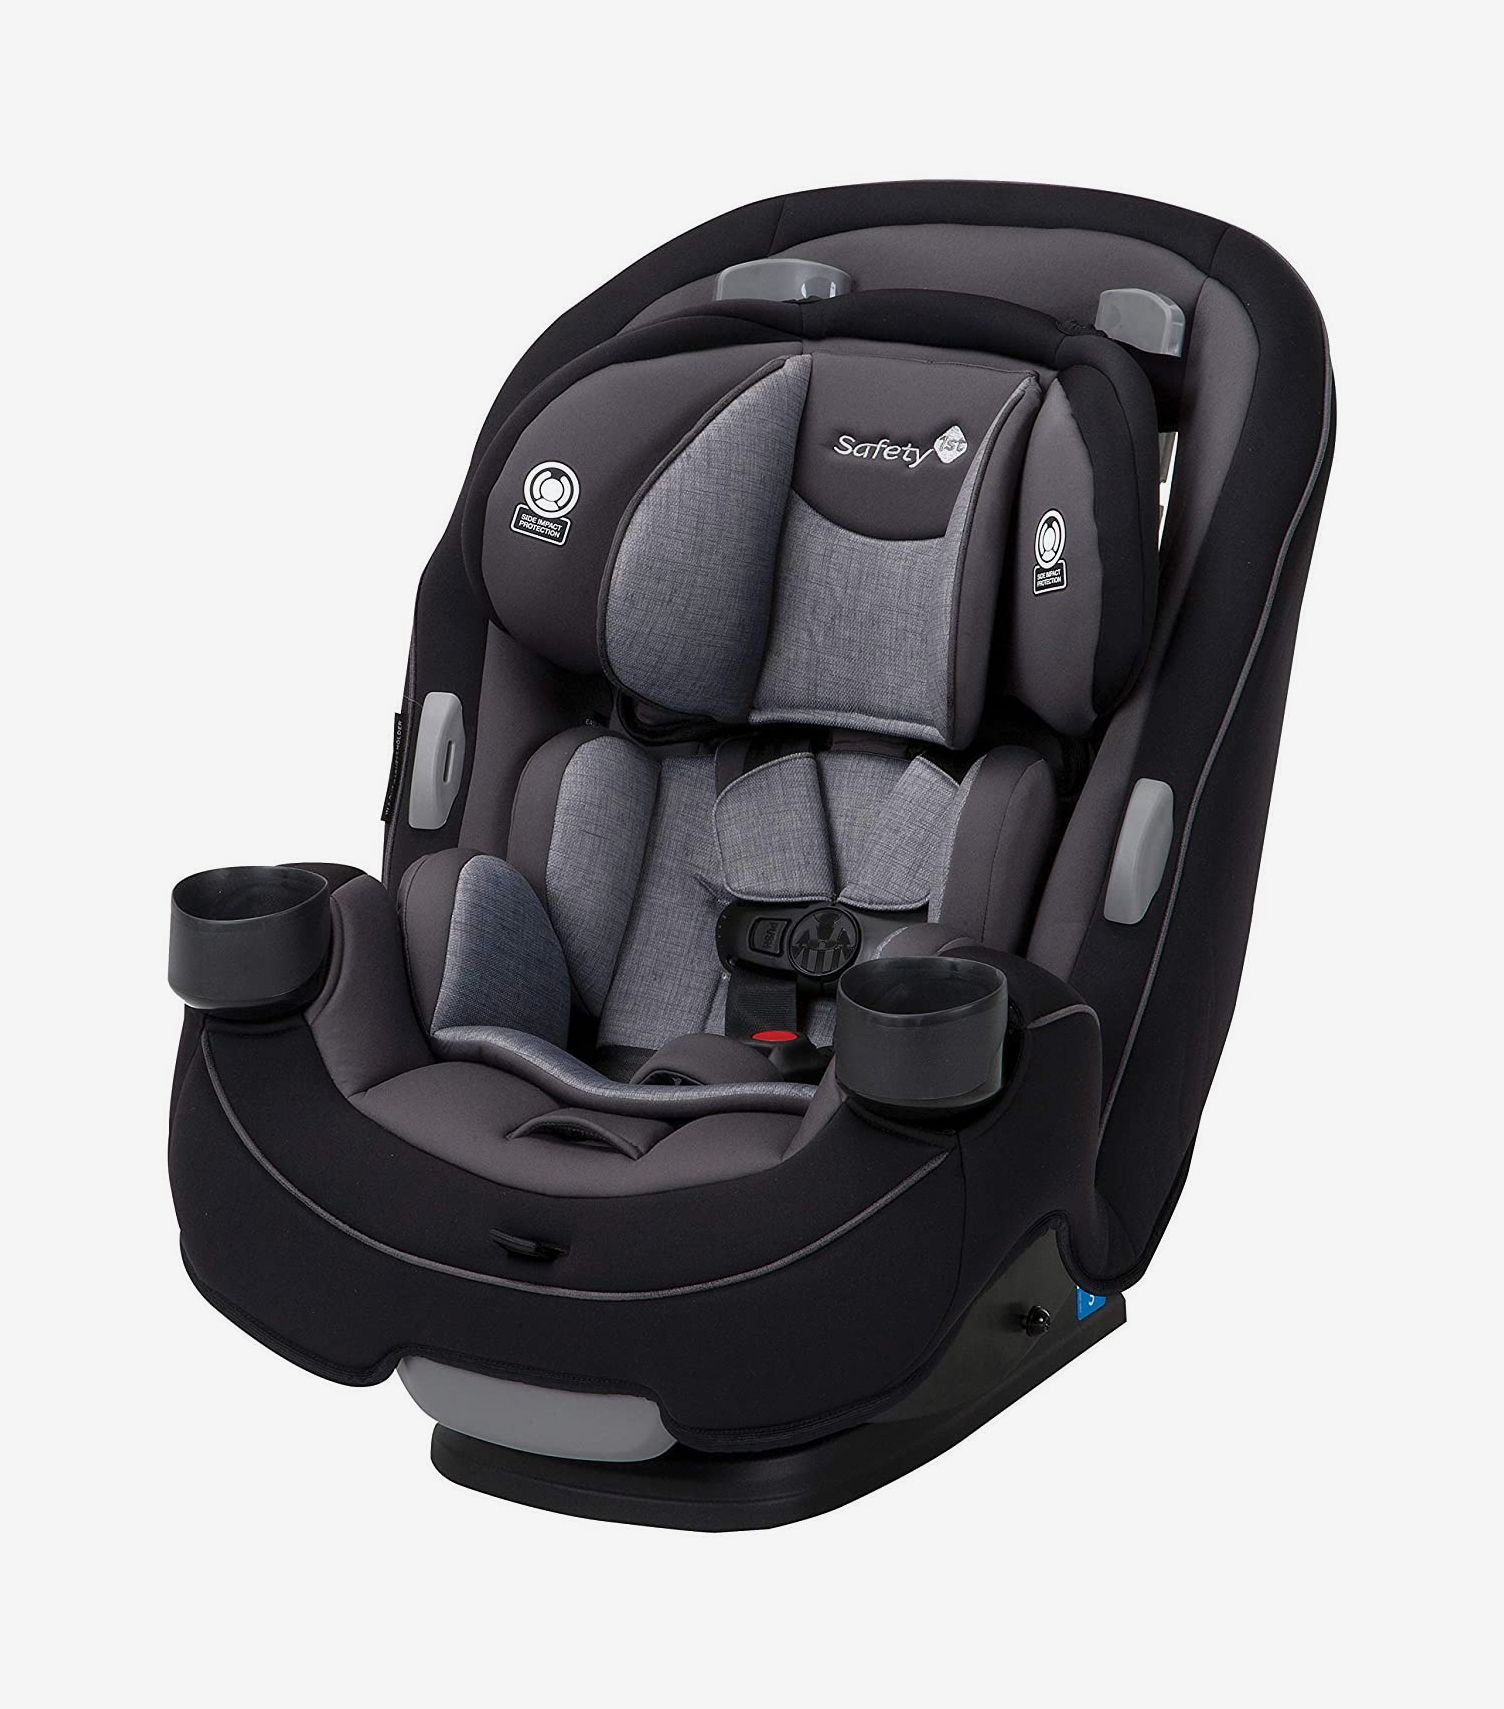 25 Best Infant Car Seats And Booster 2020 The Strategist - What Is The Best And Safest Baby Car Seat